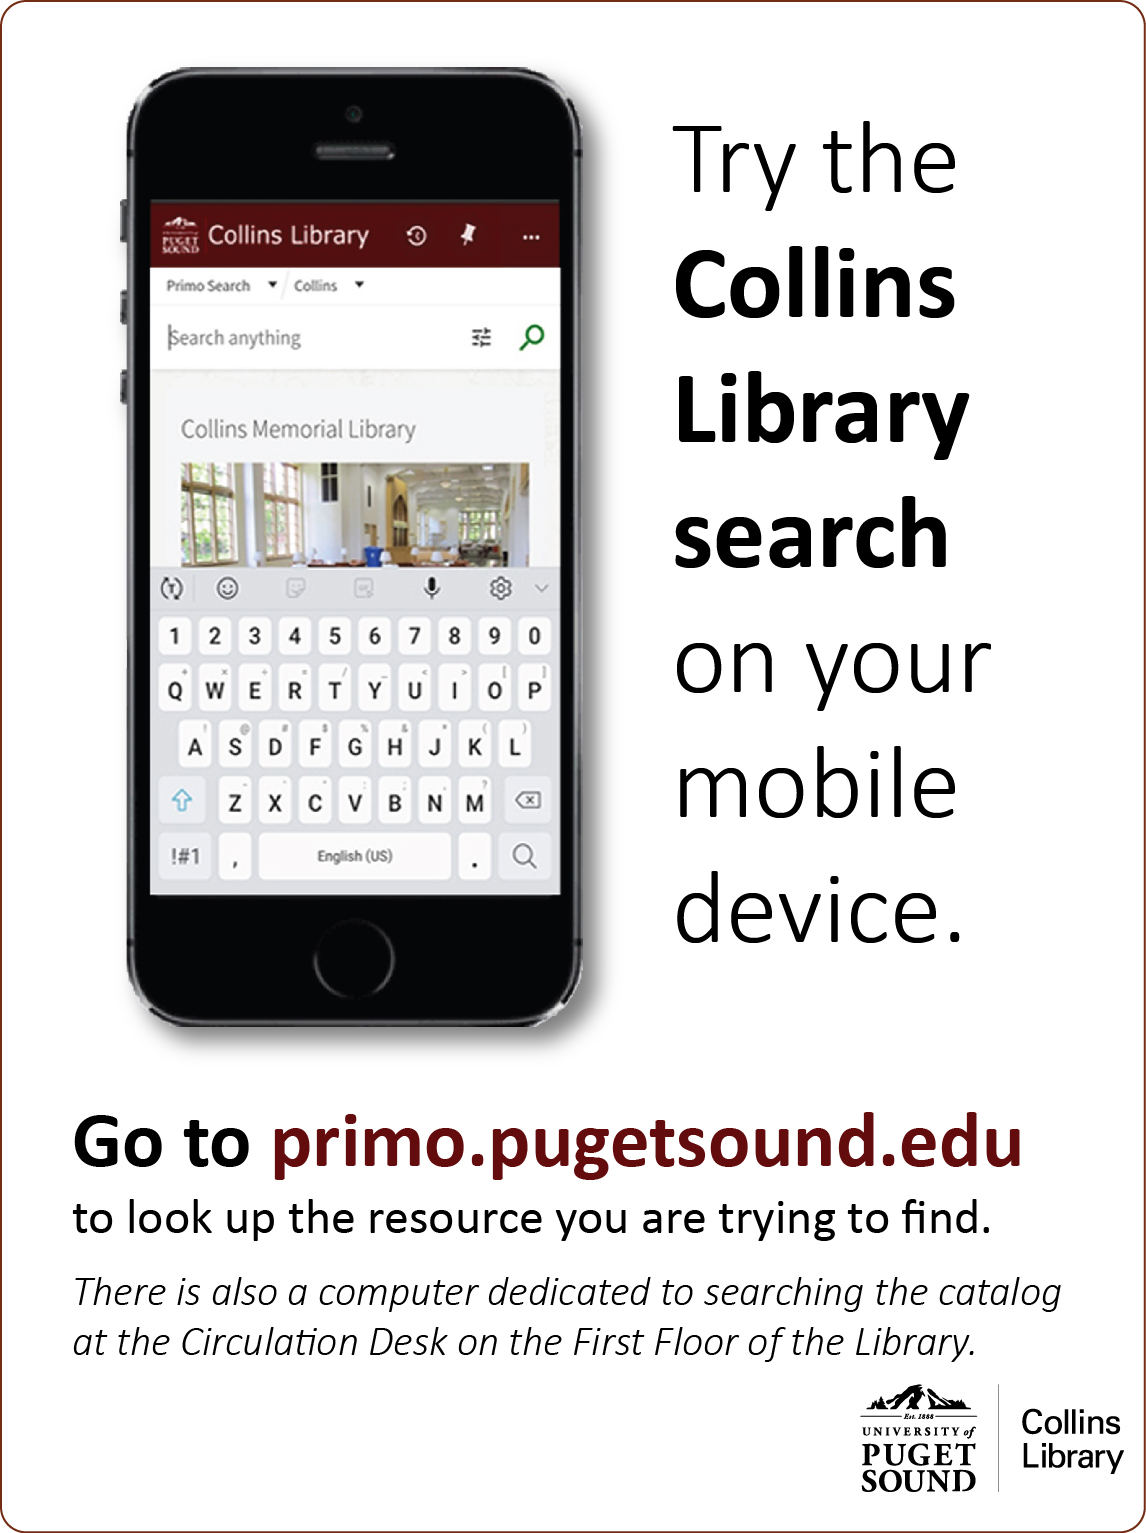 Go to primo.pugetsound.edu to look up the resource you are trying to find. There is also a computer dedicated to searching the catalogat the Circulation Desk on the First Floor of the Library.